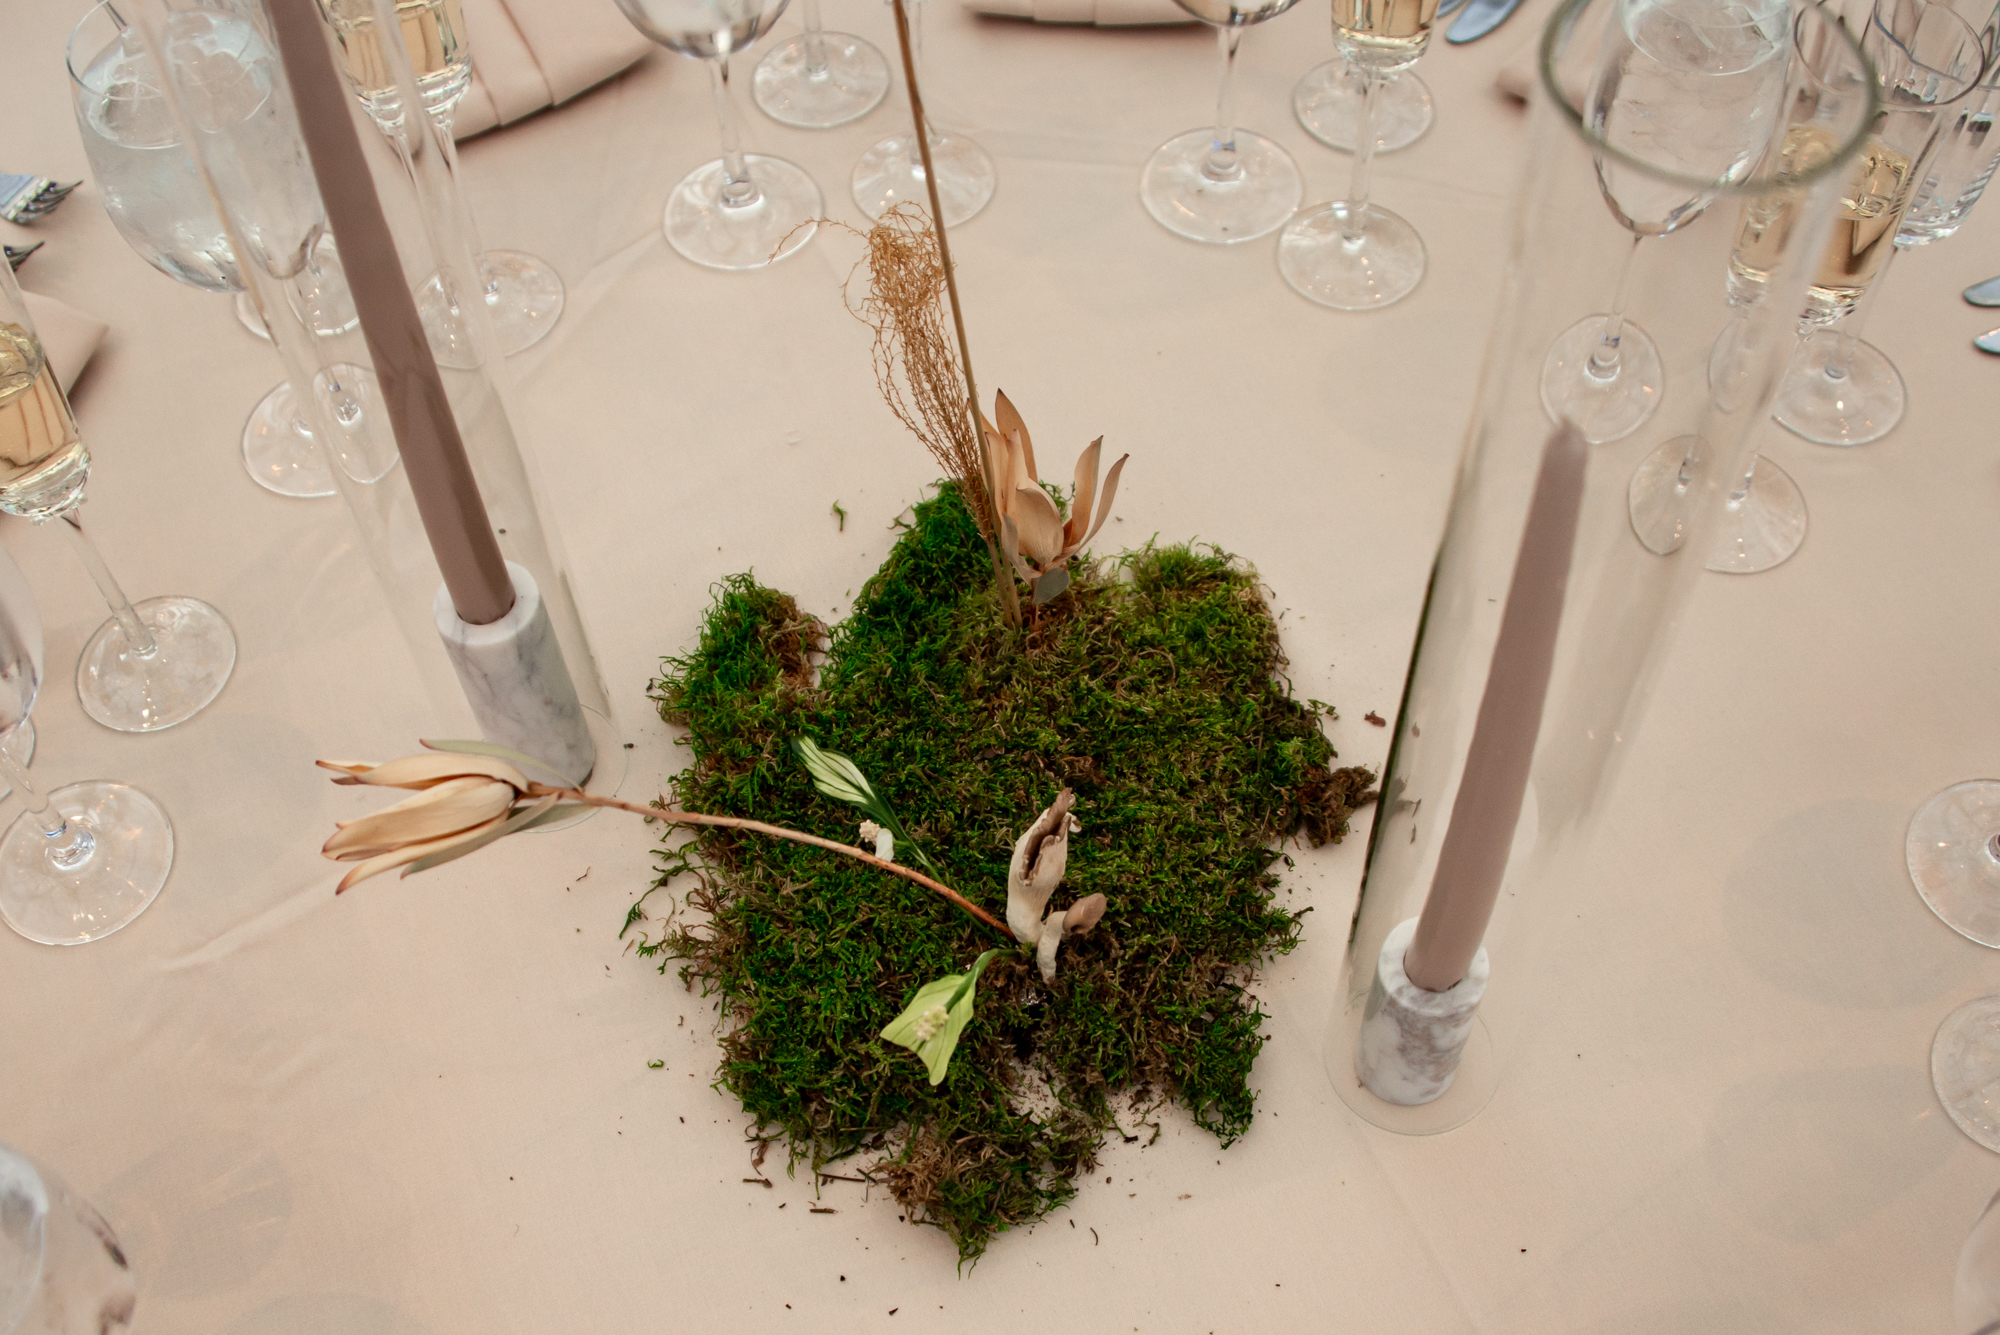 earthy florals with moss at a kimmel center wedding reception